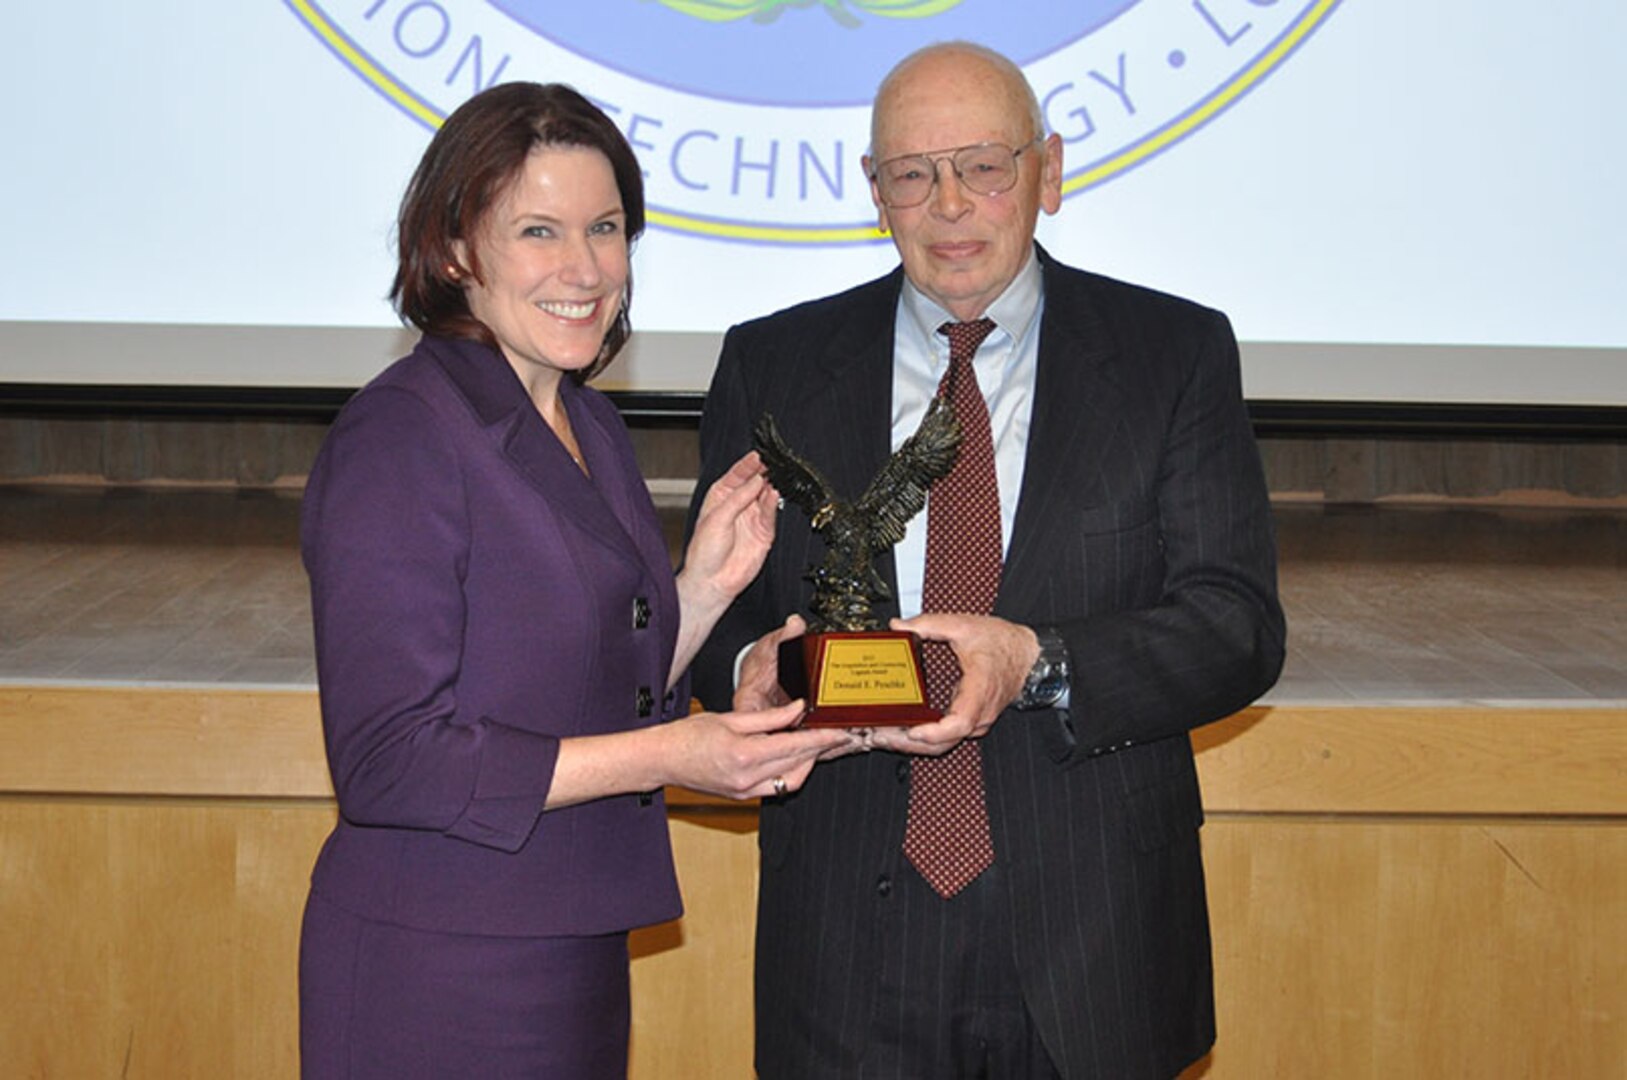 Pictured from left, Defense Procurement and Acquisition Policy Director Claire Grady presents Donald Peschka with the 2015 Under Secretary of Defense for Acquisition, Technology and Logistics Acquisition and Contracting Legends Award during a ceremony at the Pentagon Jan. 12.